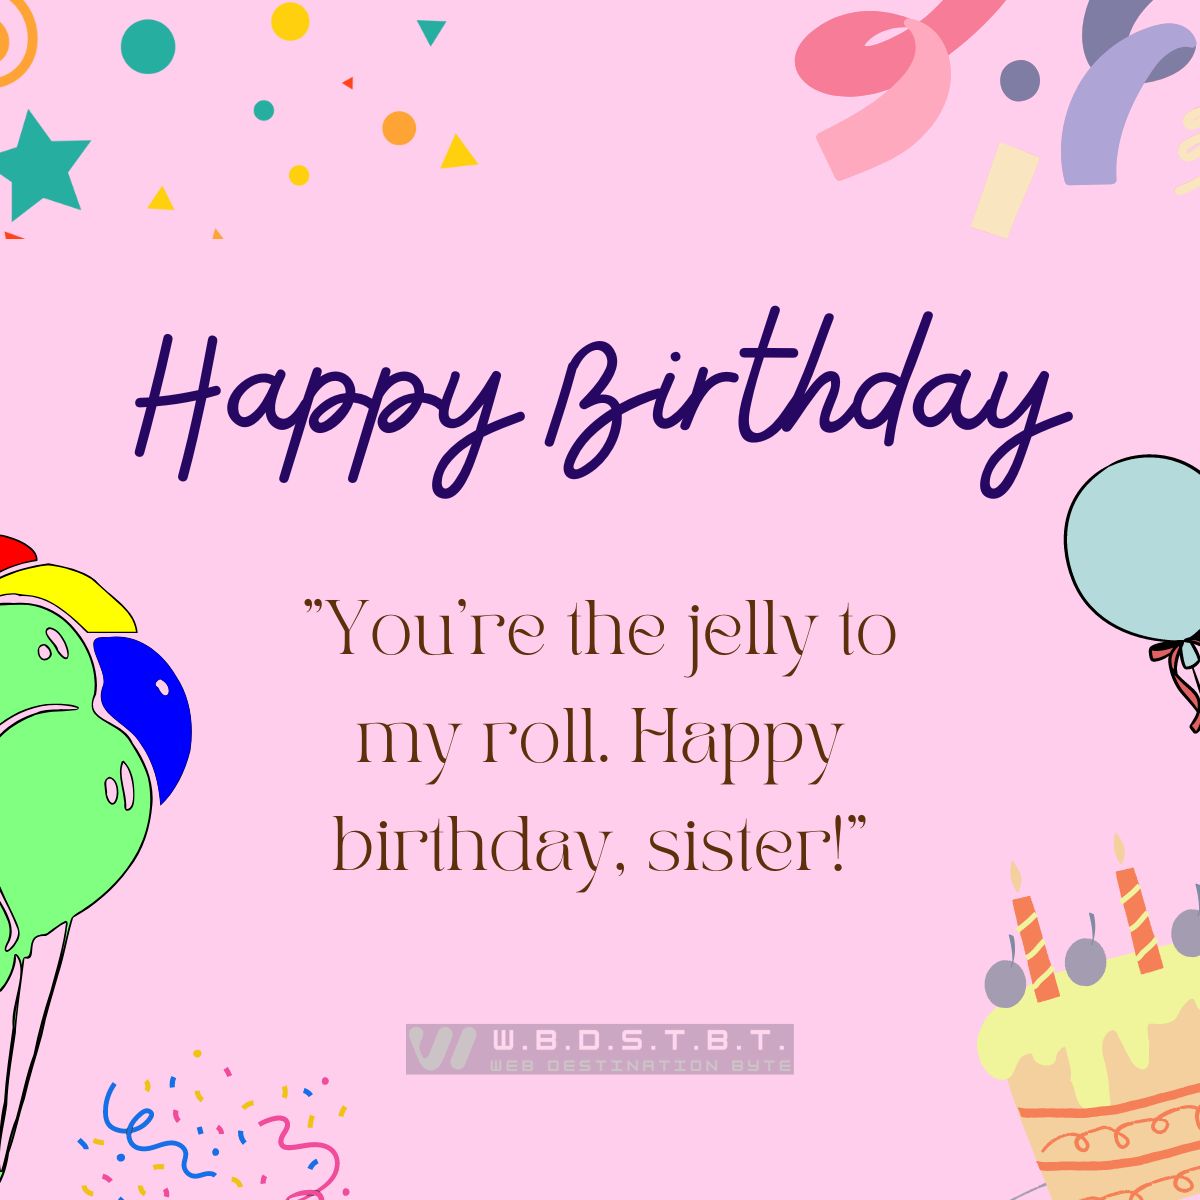 "You’re the jelly to my roll. Happy birthday, sister!"